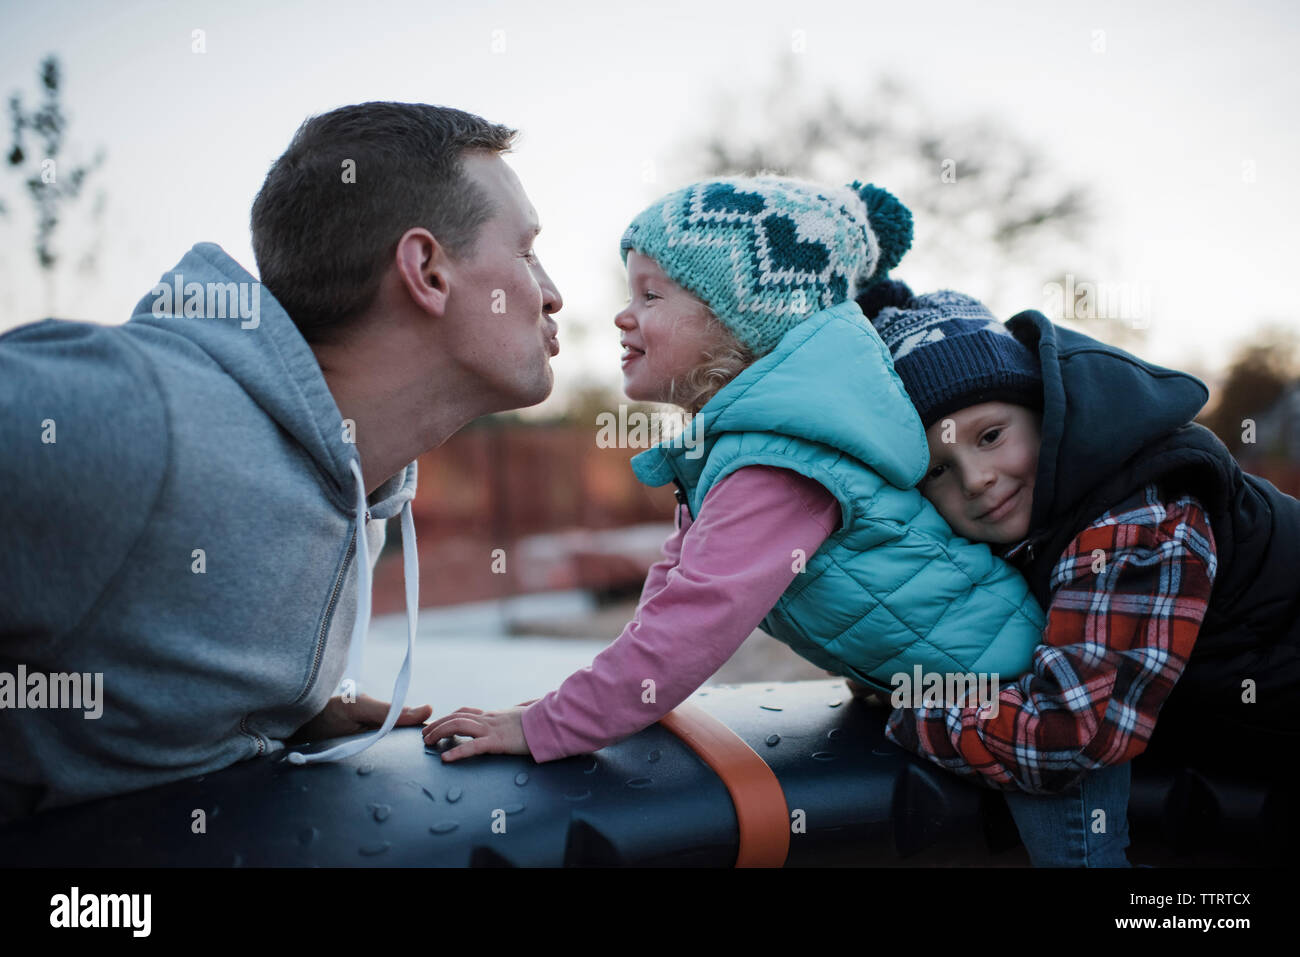 Portrait of brother holding sister playing with father at playground Stock Photo